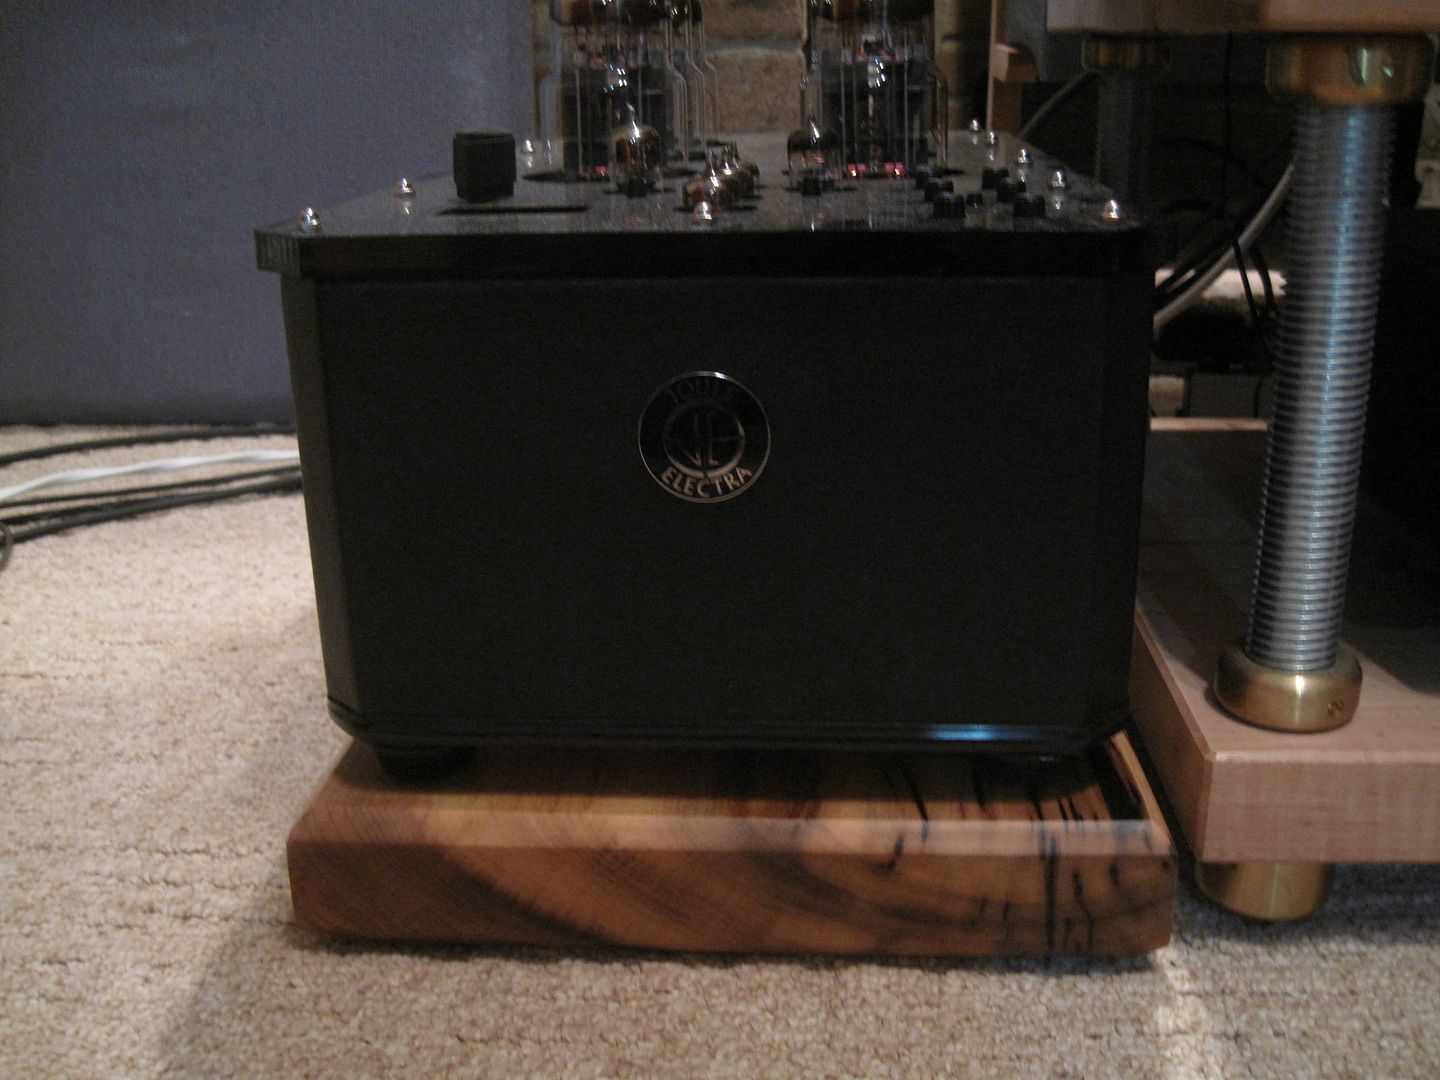 Amp Stands